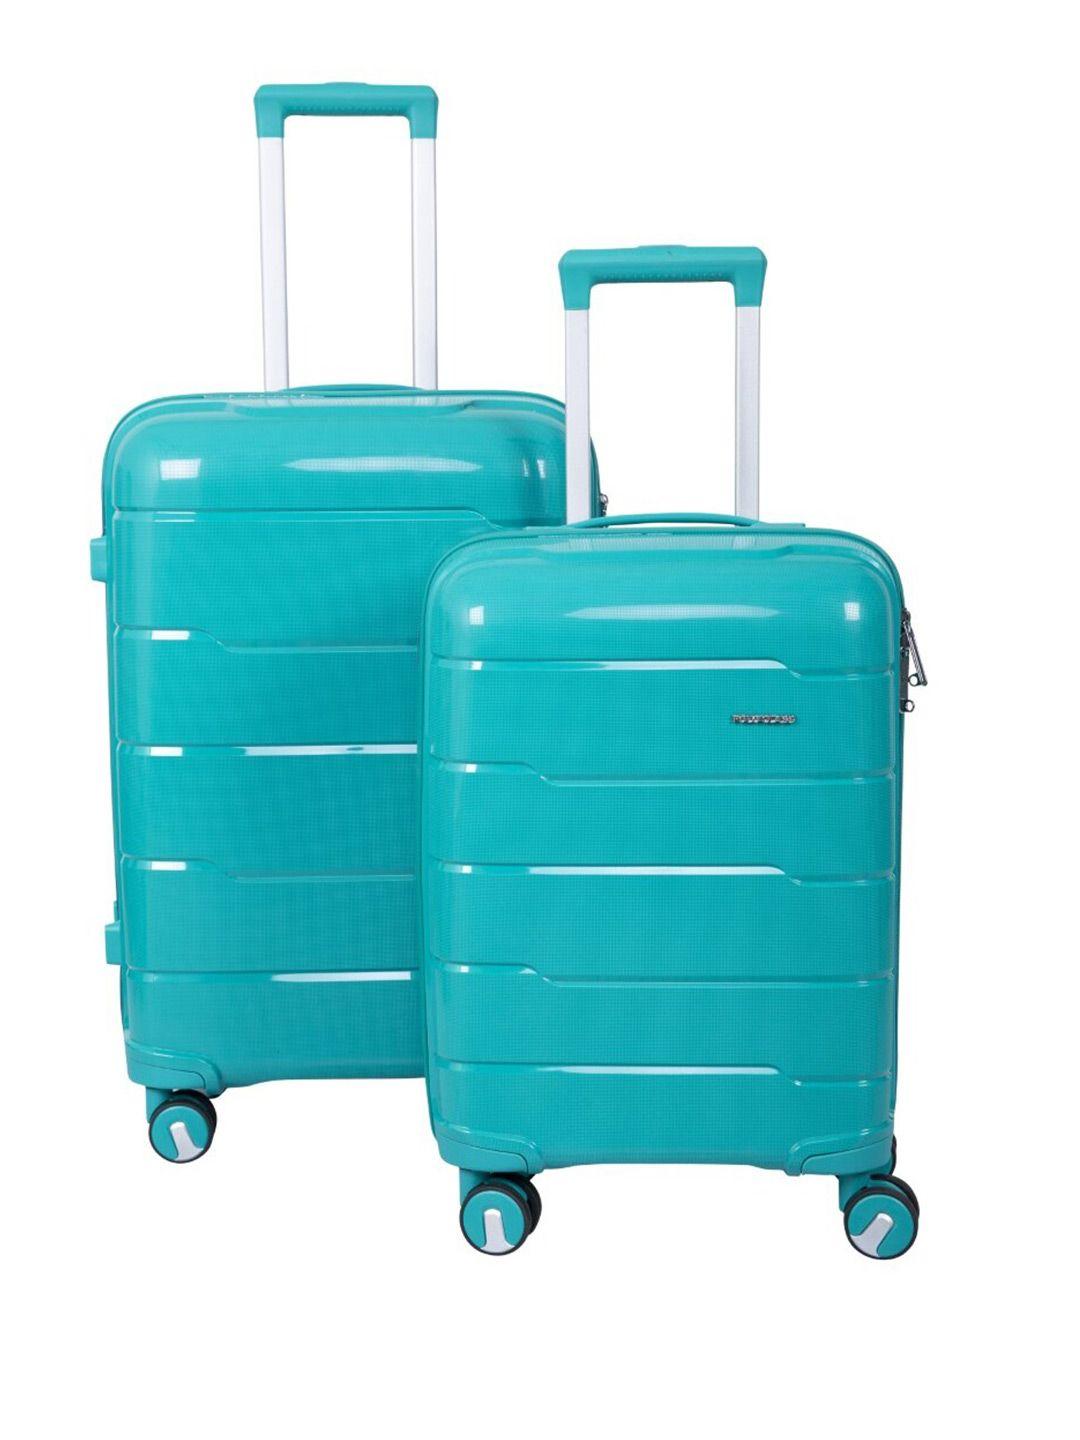 polo class set of 2 textured large trolley bag - 70 l